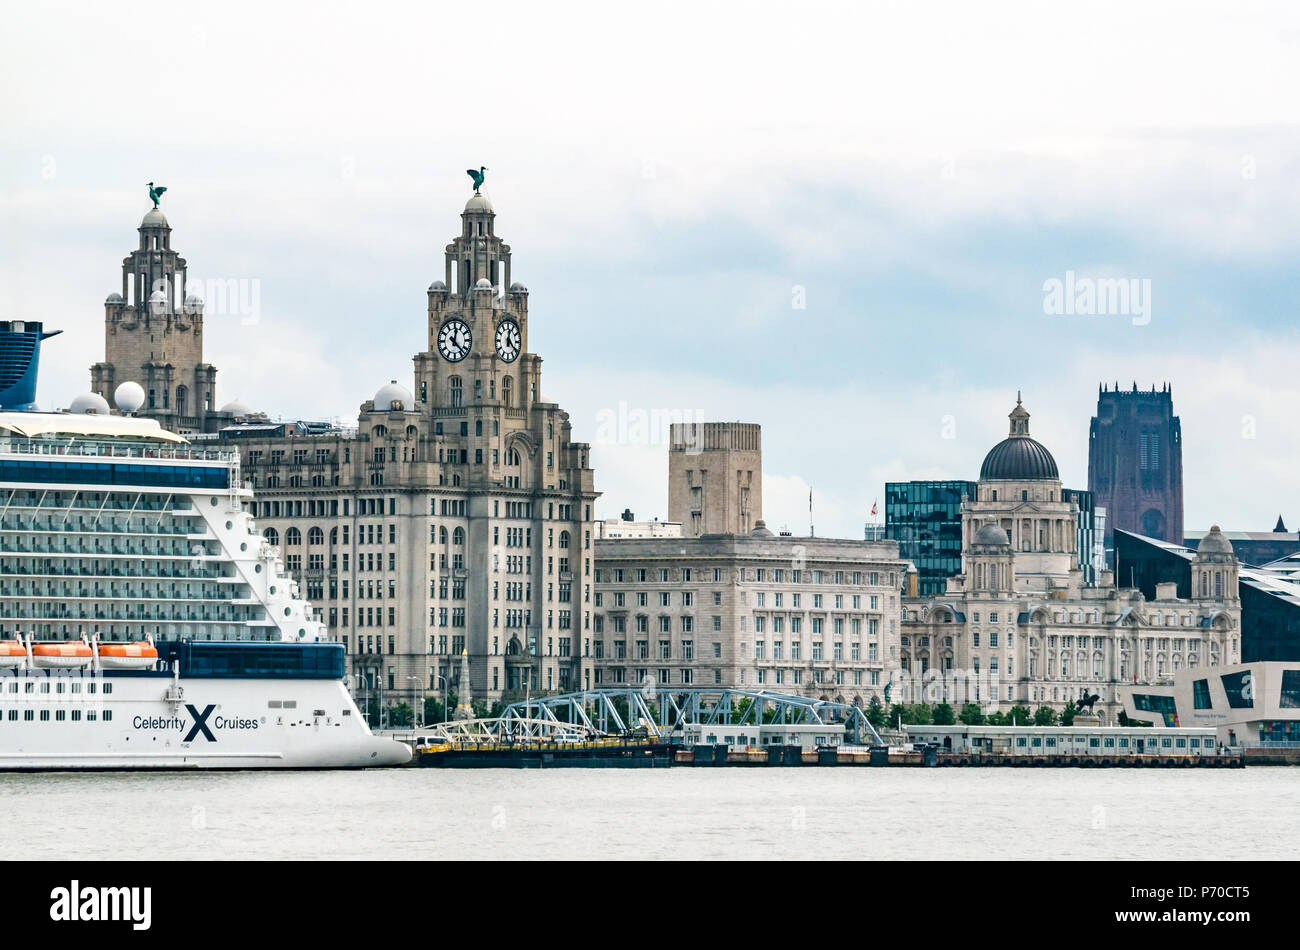 View of clock towers of Royal Liver building with Liver Birds and UK's largest clocks, Celebrity Cruise ship, Pier Head, Liverpool, England, UK Stock Photo